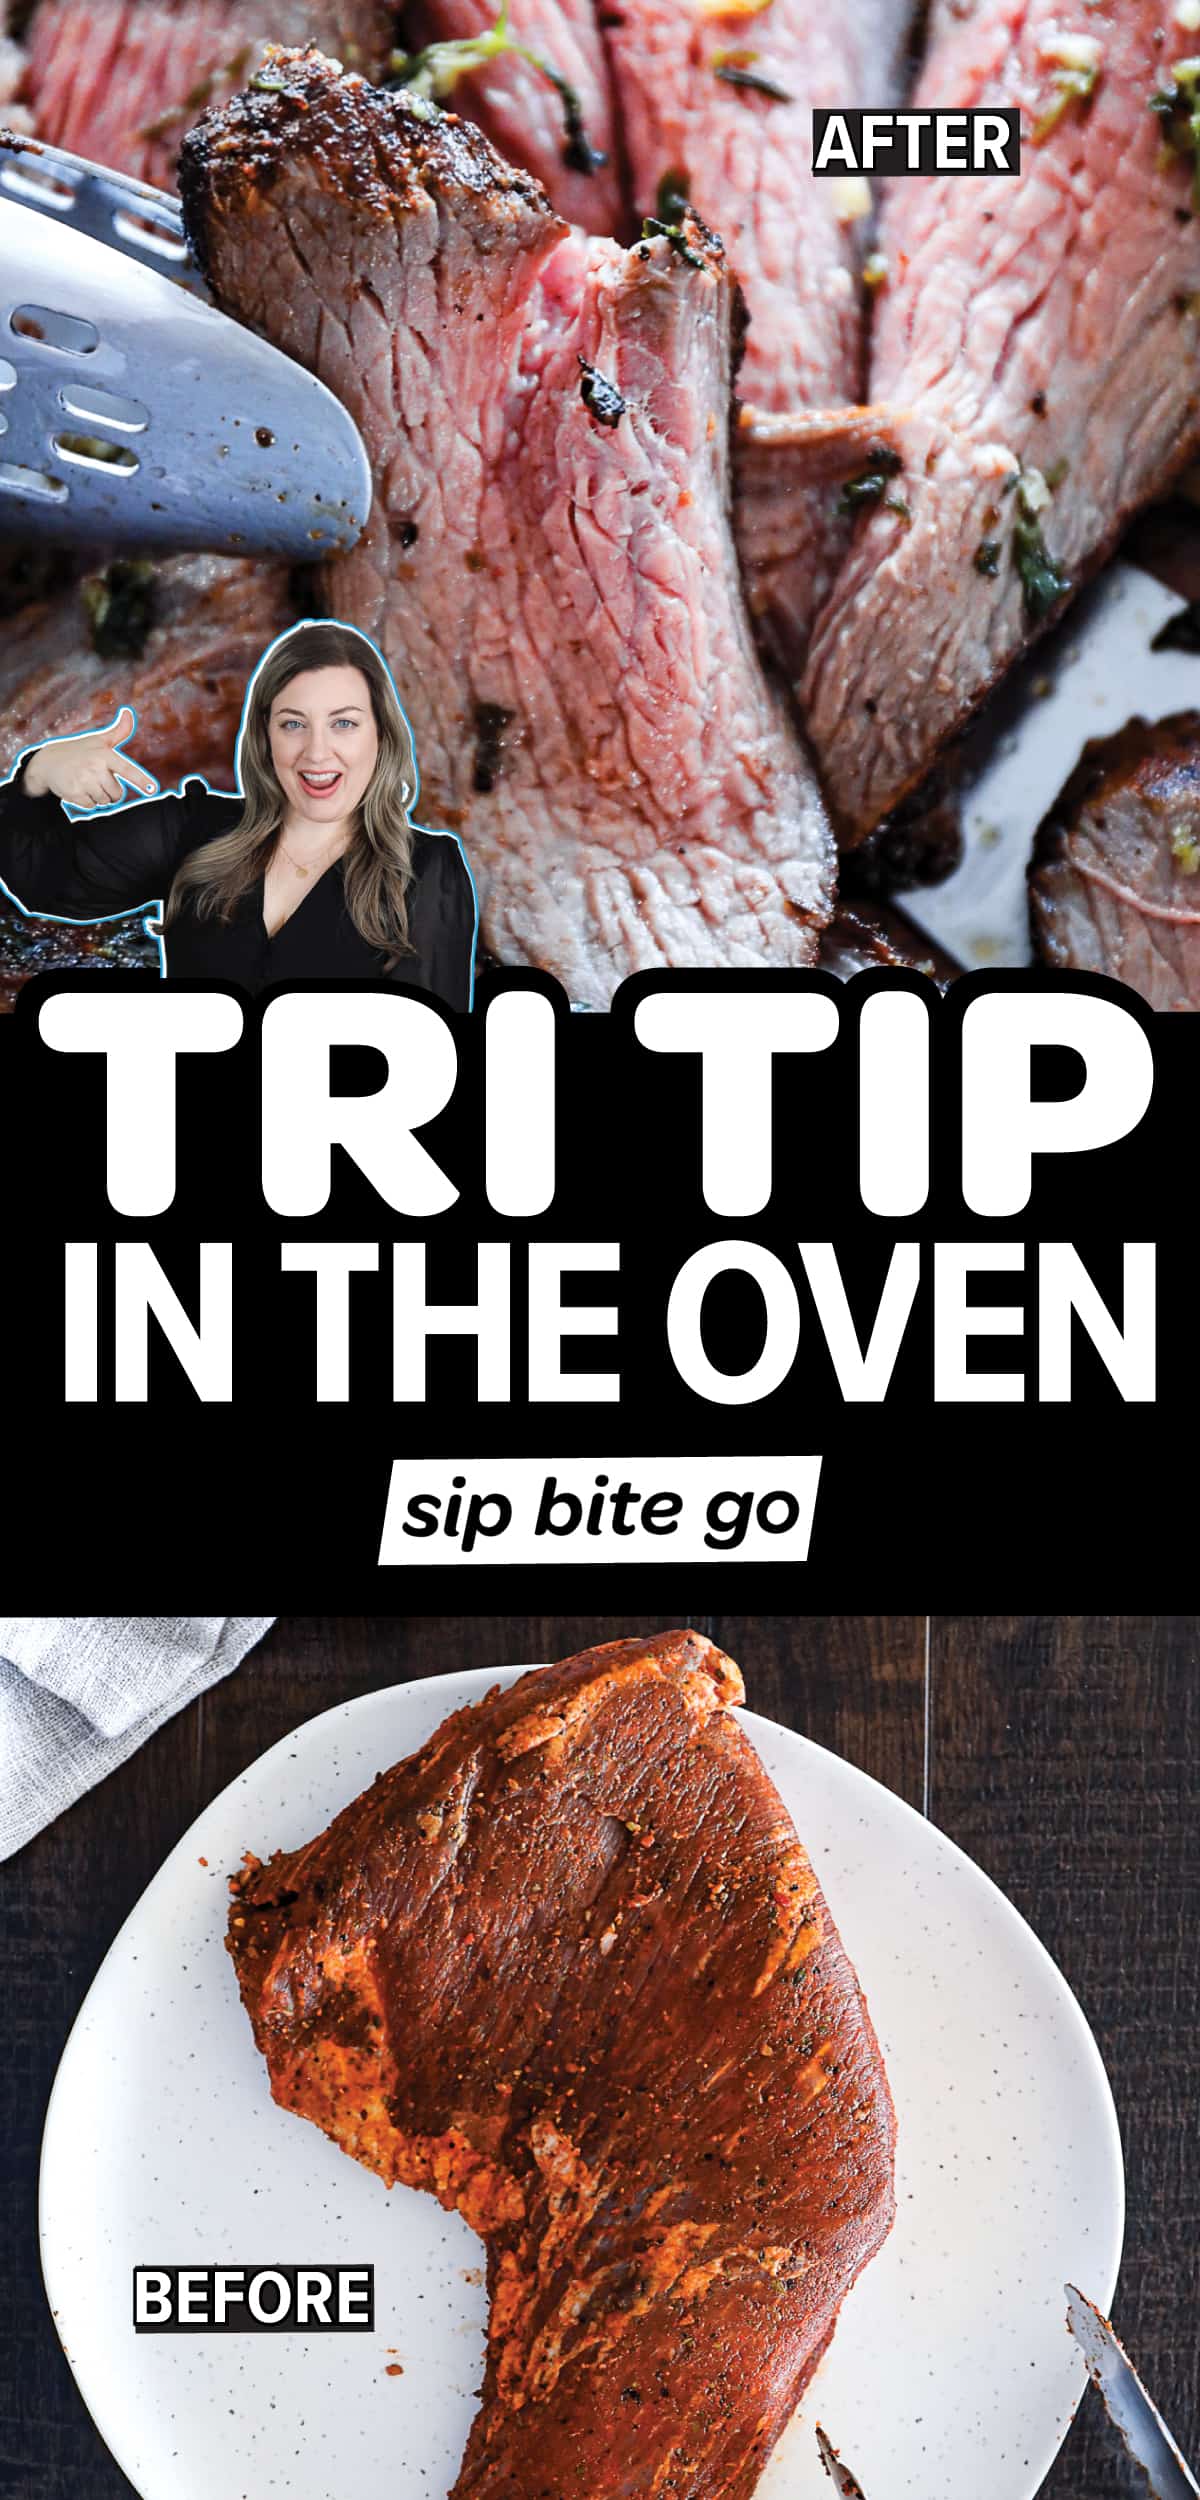 Tri Tip In Oven recipe images and text overlay.